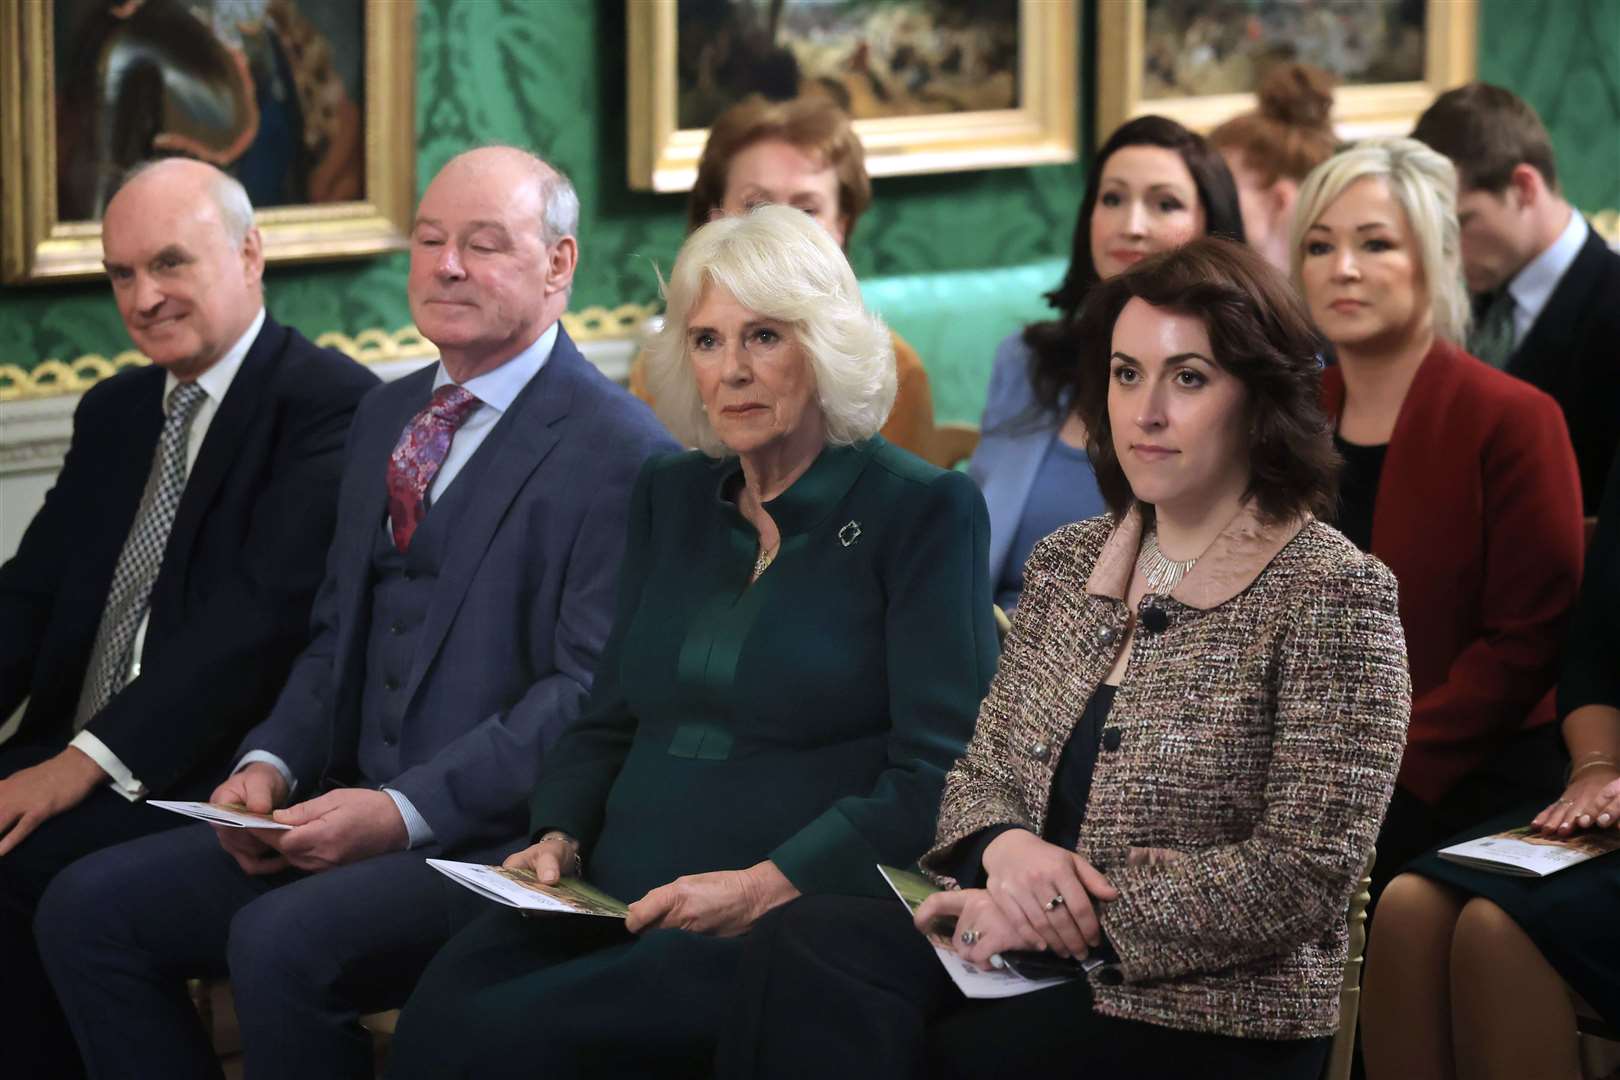 Camilla watched performances to mark World Poetry Day at Hillsborough Castle (Liam McBurney/PA)